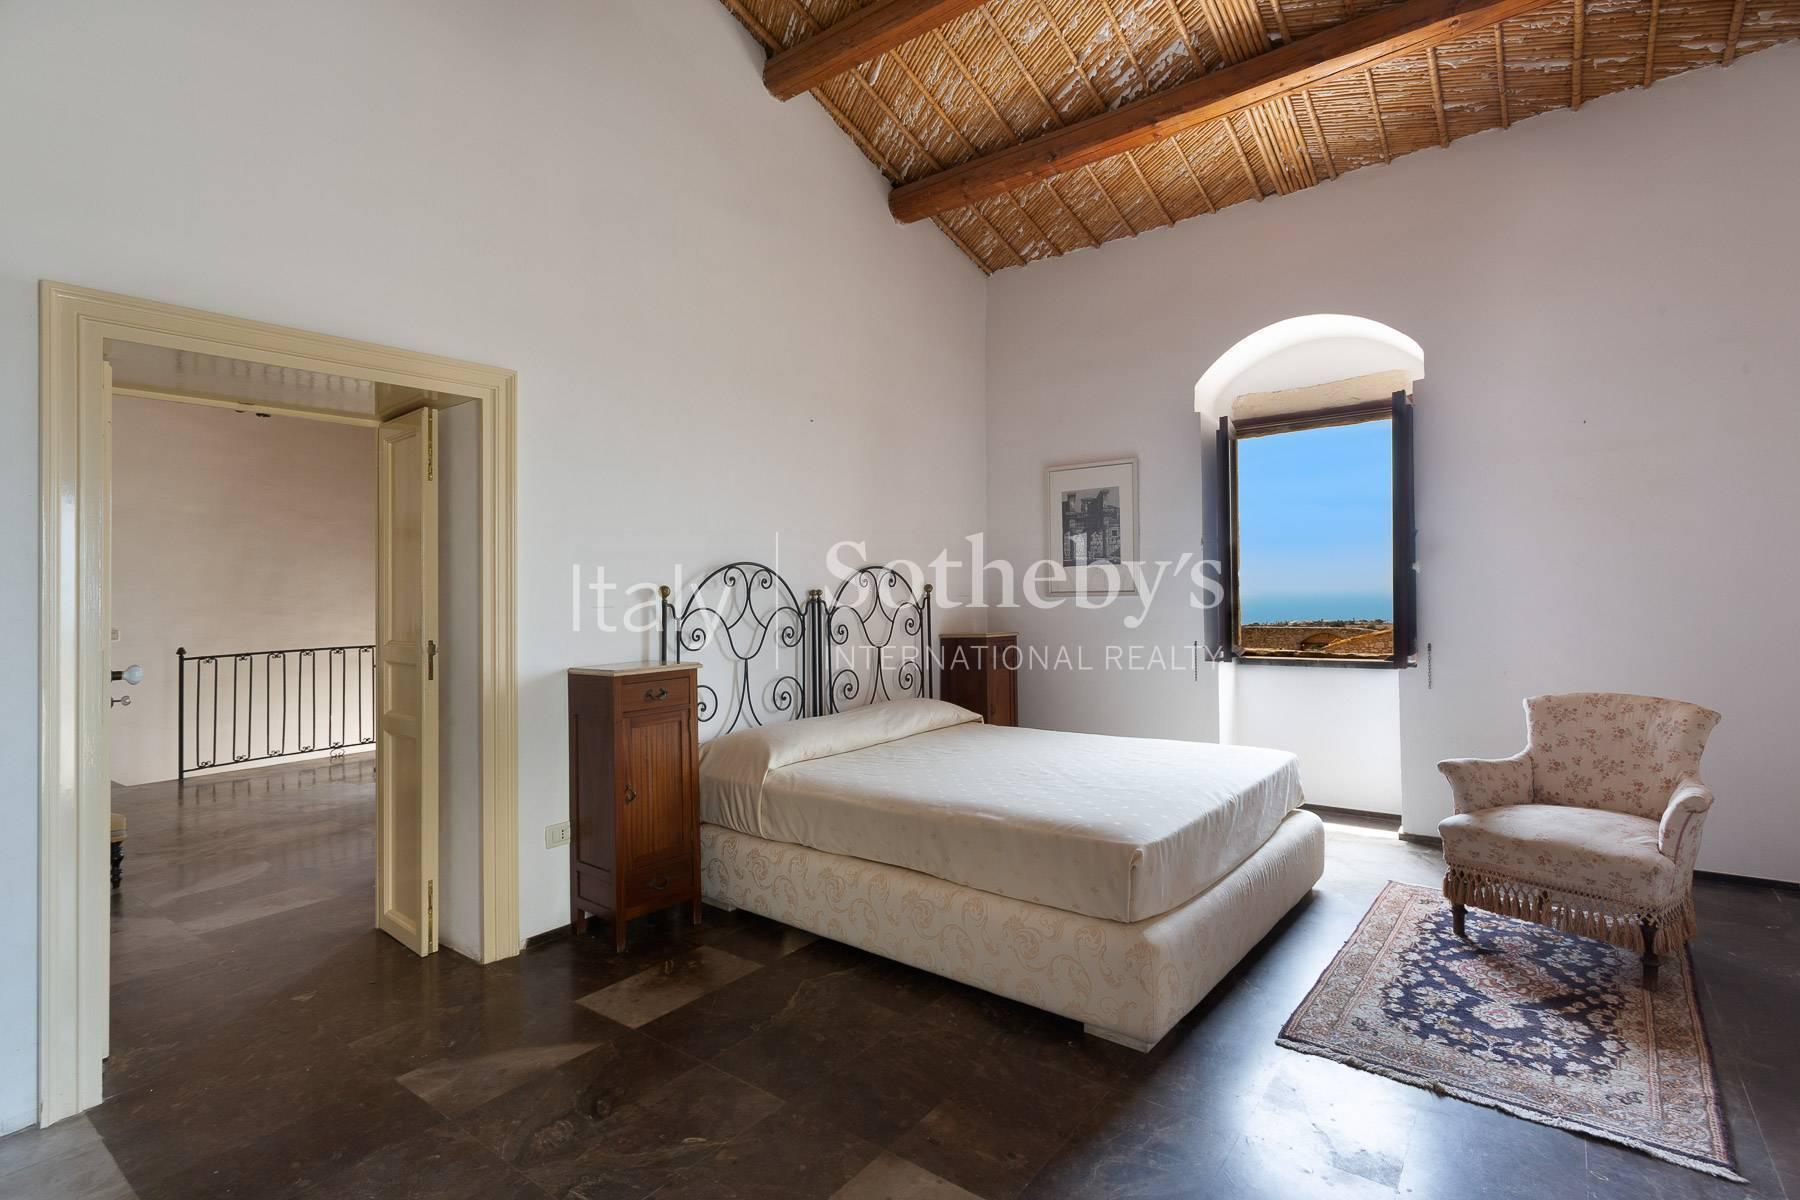 Renovated ancient hamlet with a sea view of the Iblei hills - 27